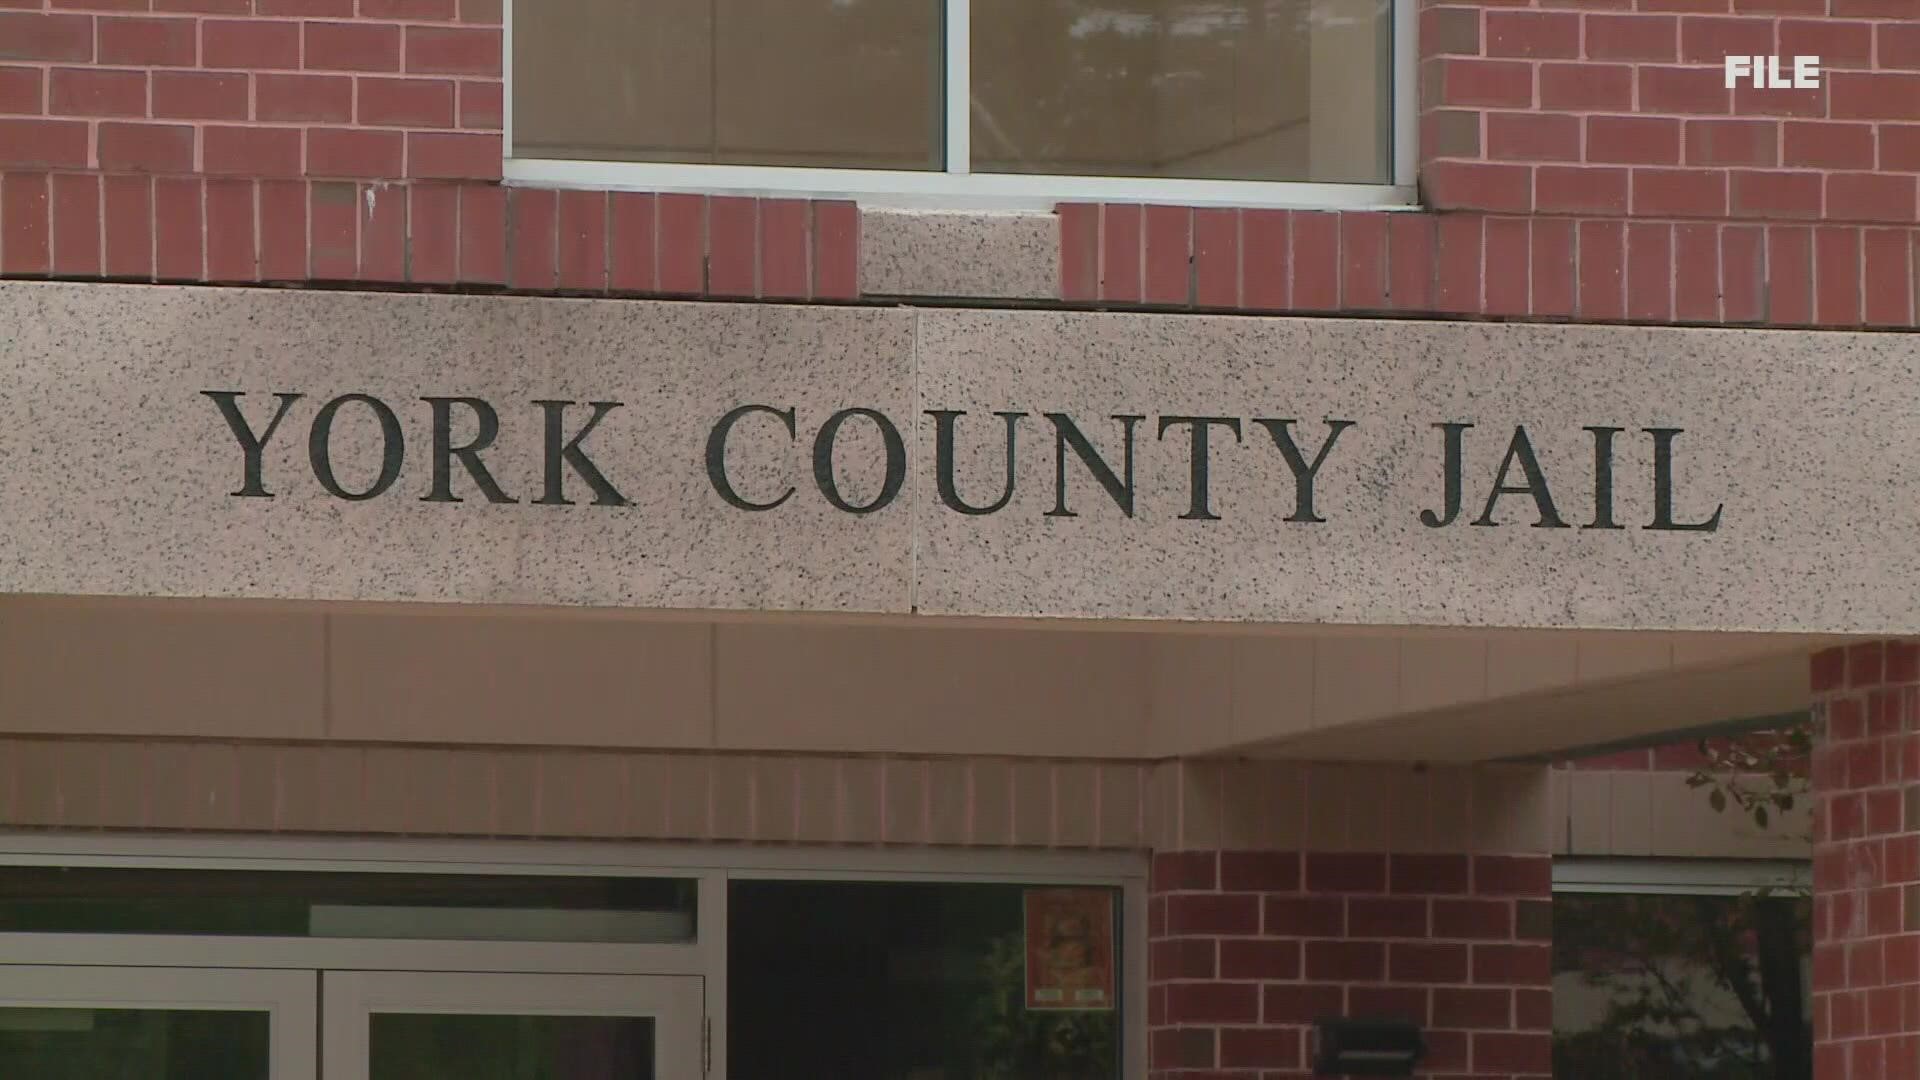 The York County Jail is discontinuing visits for a few weeks to free up staff.